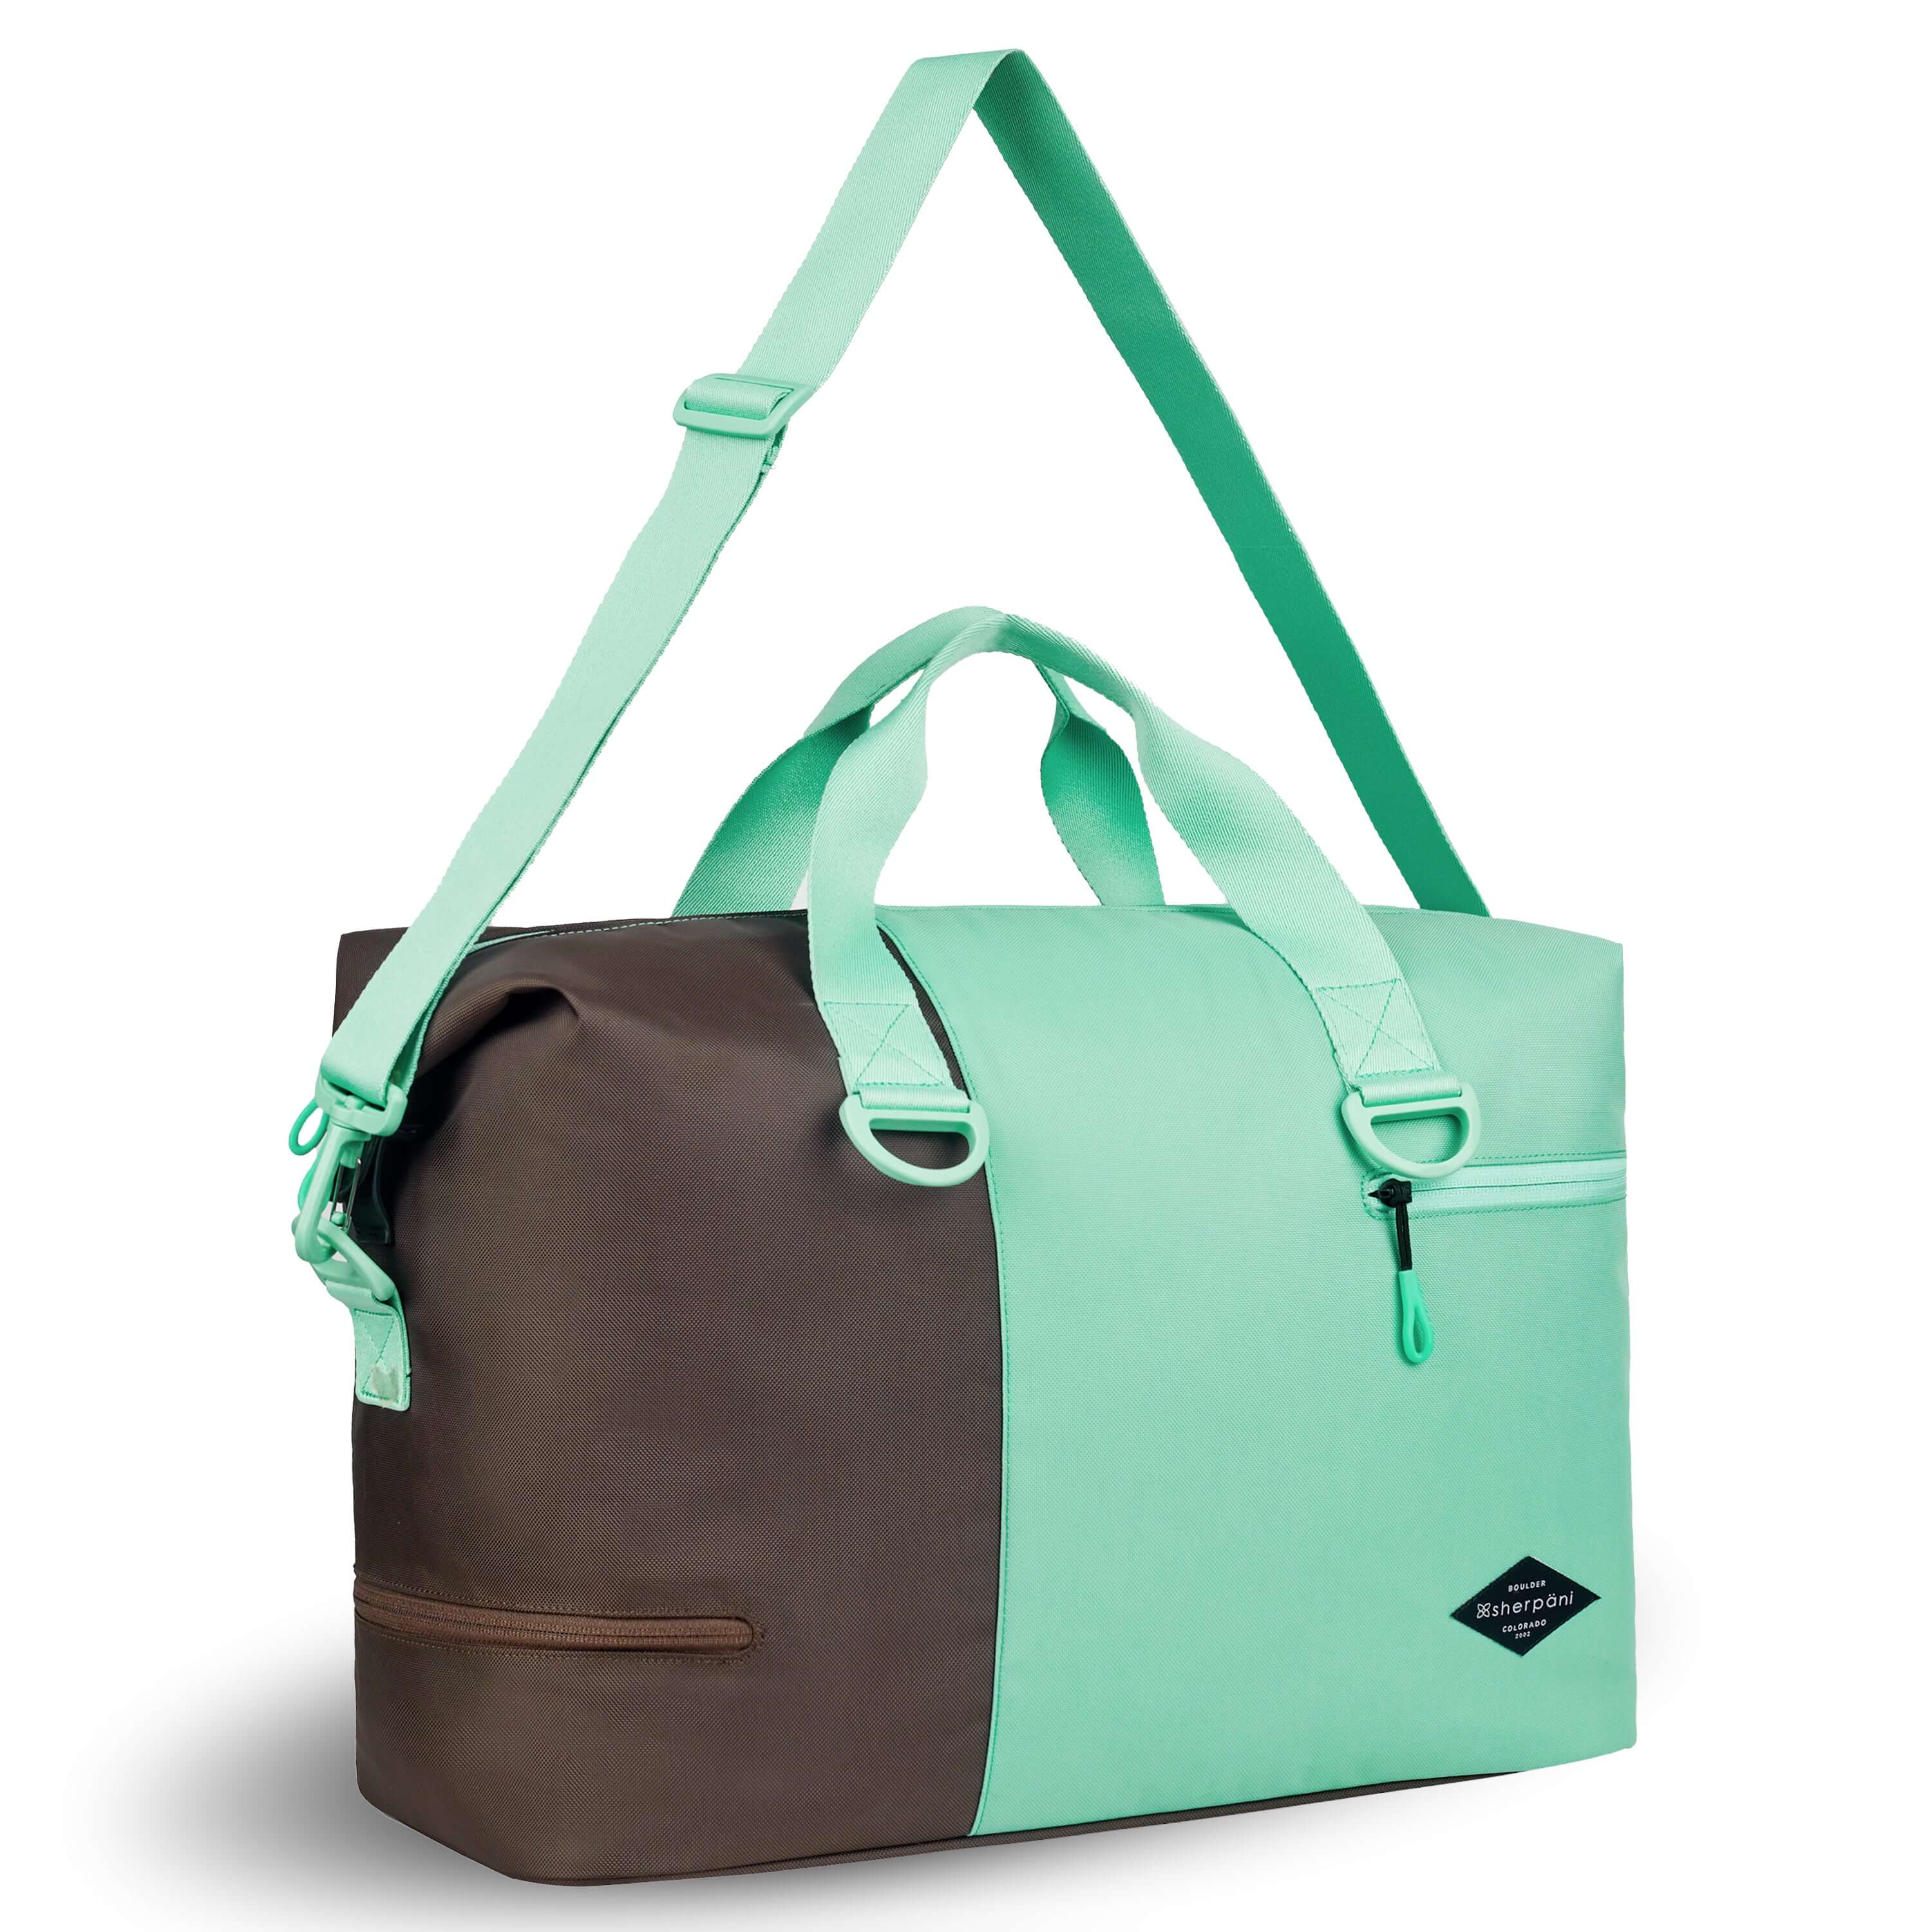 Angled front view of Sherpani bag, the Sola in Seagreen. The bag is two-toned in light green and brown. Two external zipper compartments are visible on the top right and bottom left of the bag. Easy-pull zippers are accented in light green. The bag has tote handles and an adjustable/detachable crossbody strap. #color_seagreen